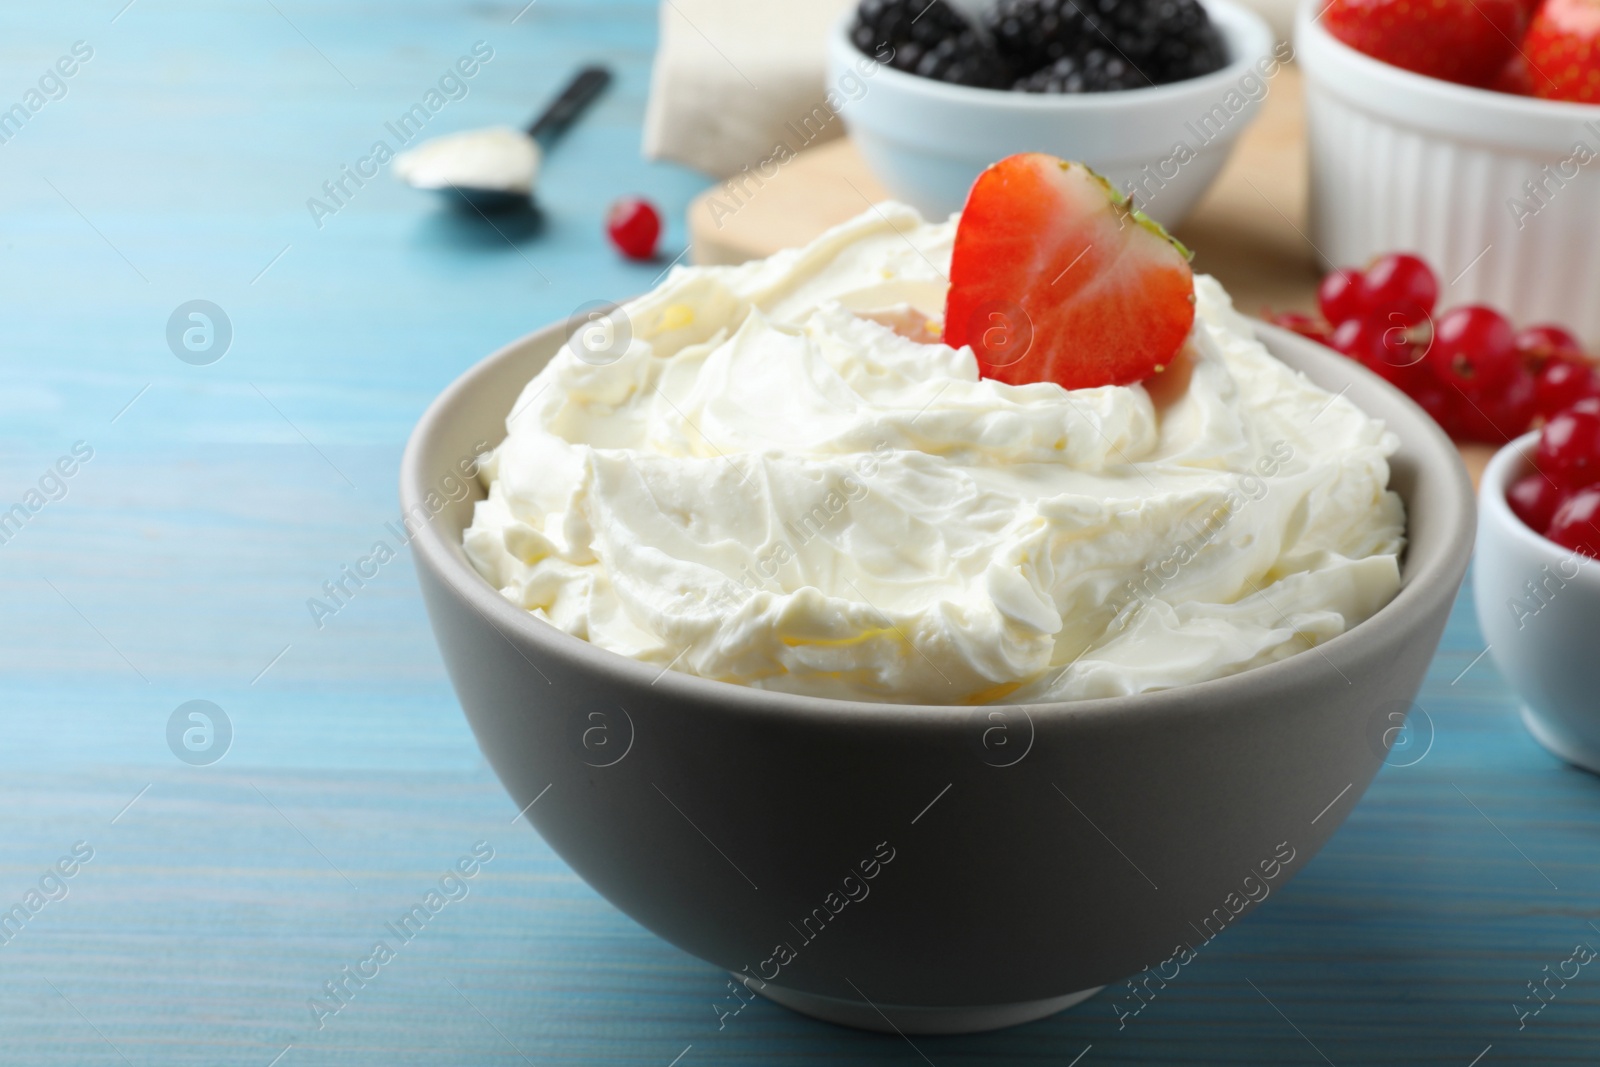 Photo of Tasty cream cheese and fresh berries on light blue wooden table